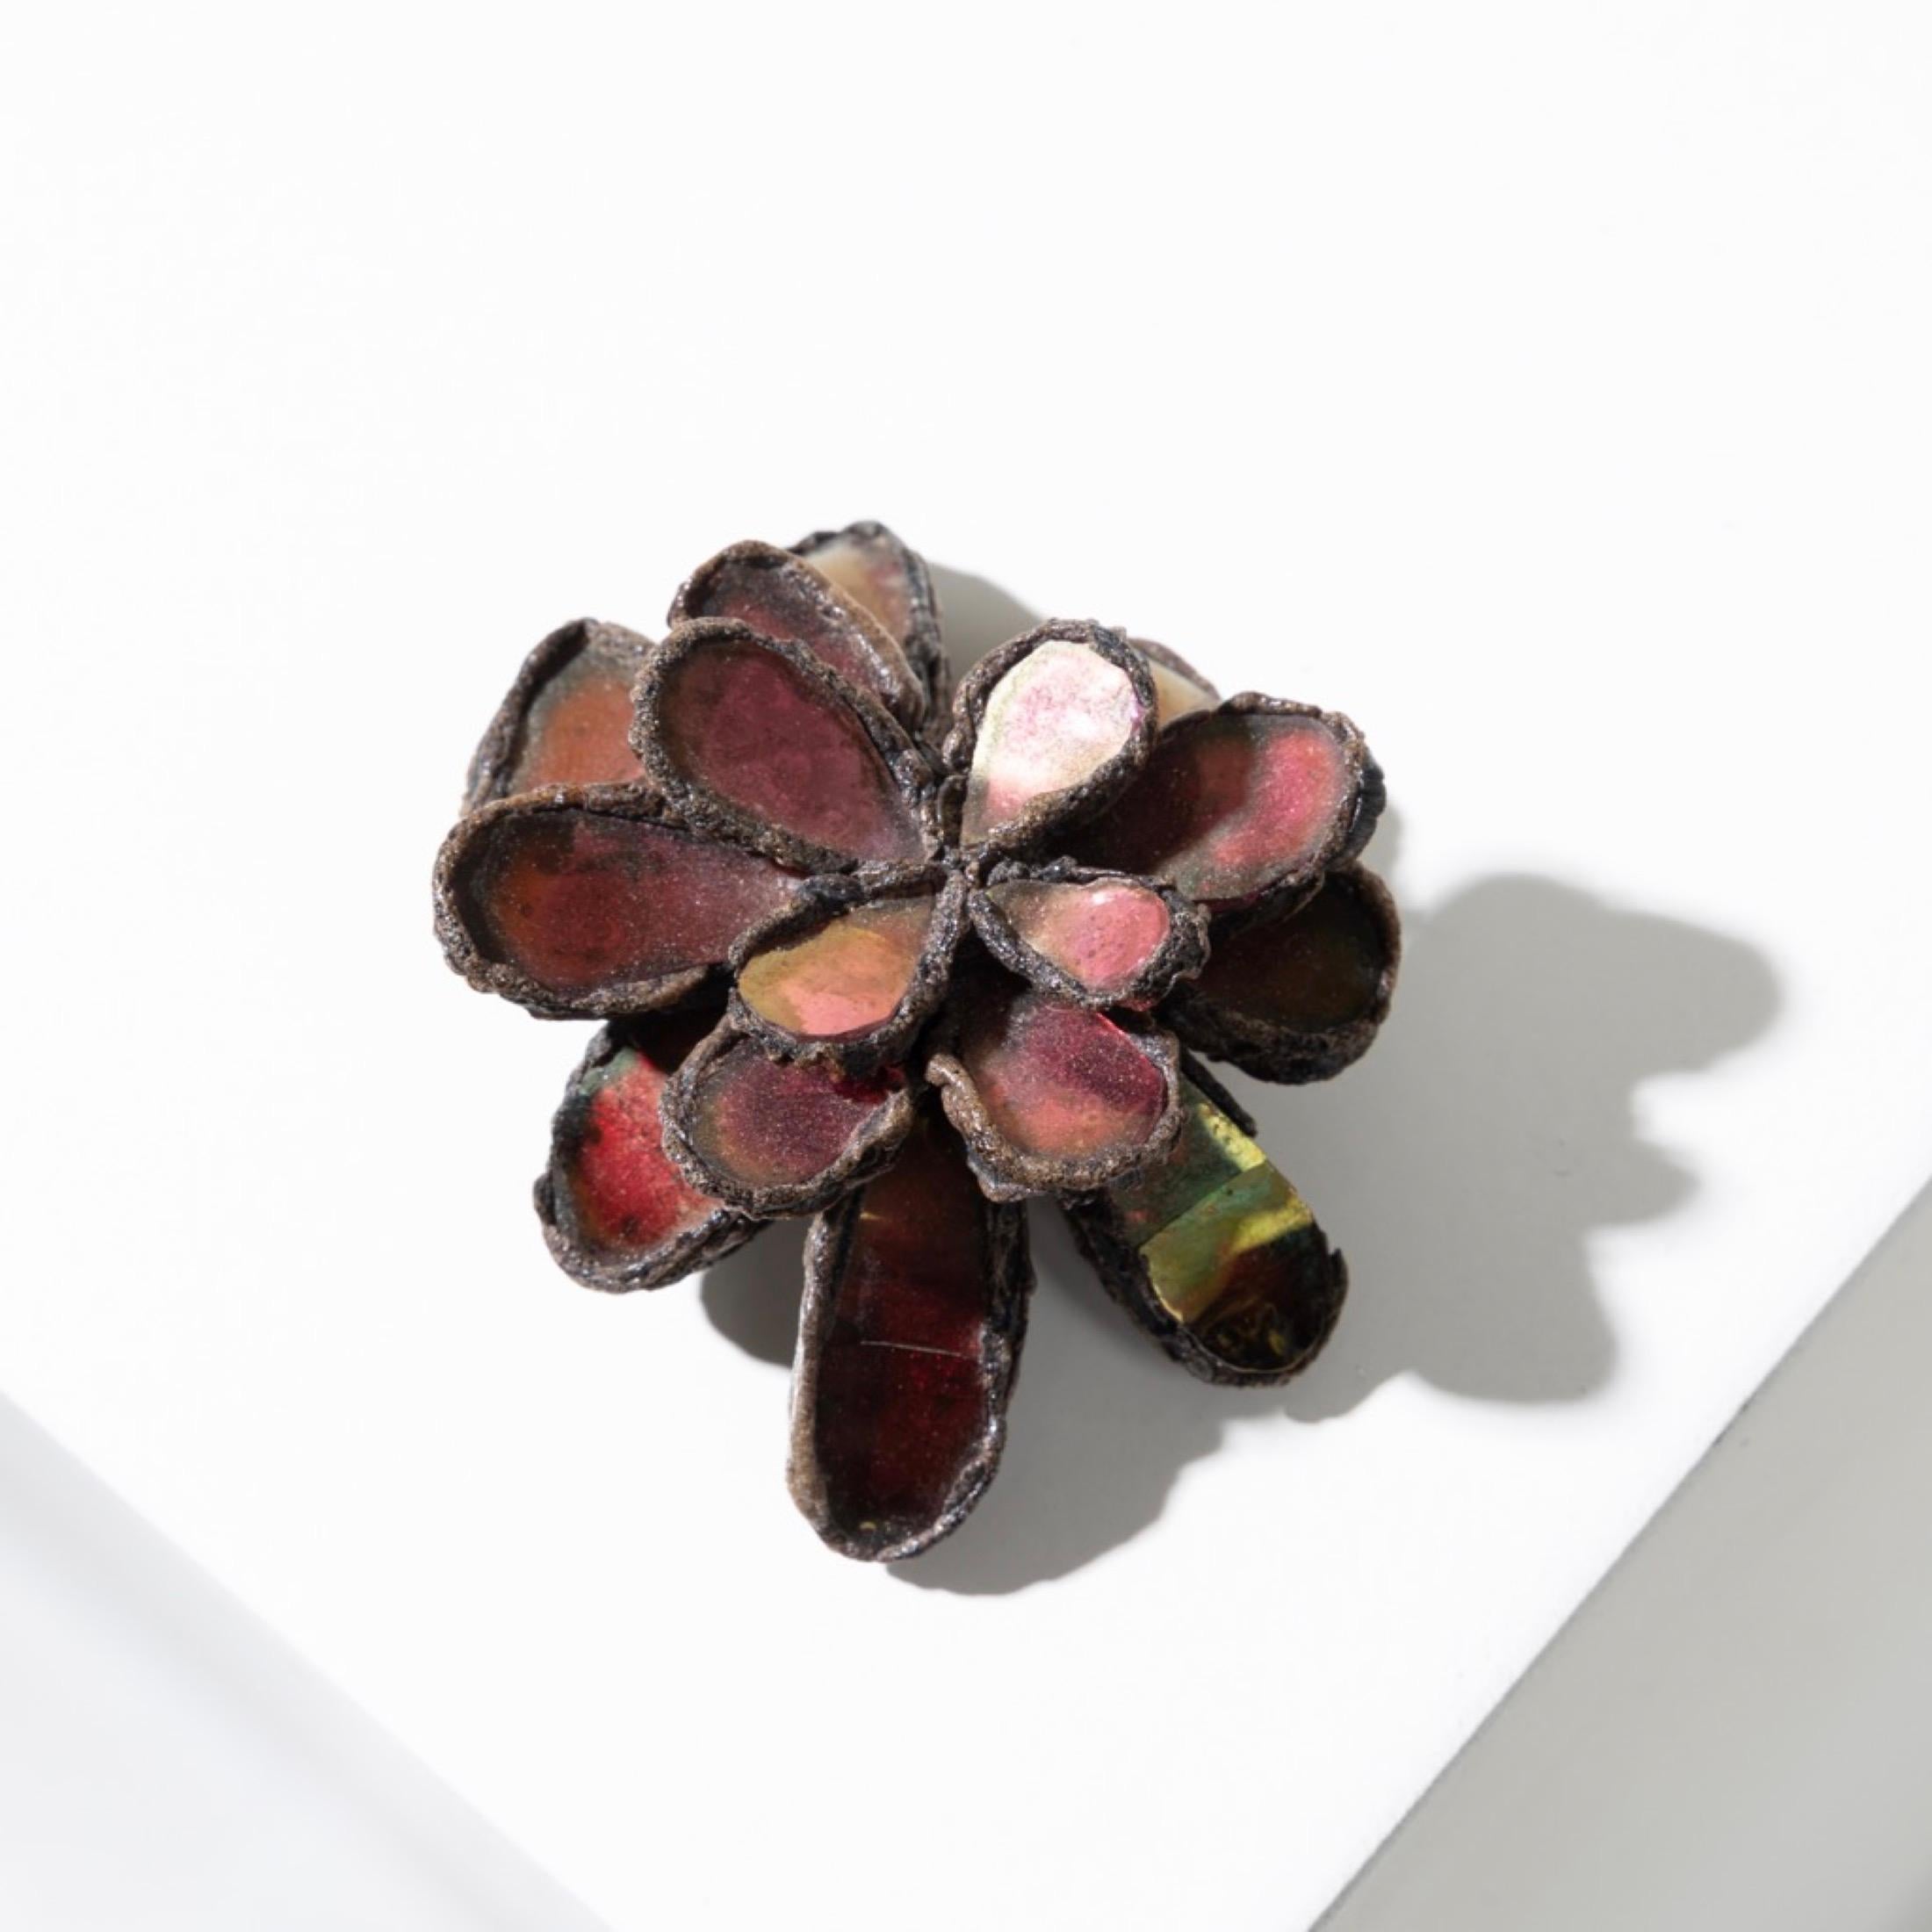 This Brooch in black Talosel encrusted with red mirrors in the shape of flower petals represents a very characteristic aesthetic of the work of Line Vautrin.
This organic shape is designed to evoke a flower, with delicately arranged red mirrored